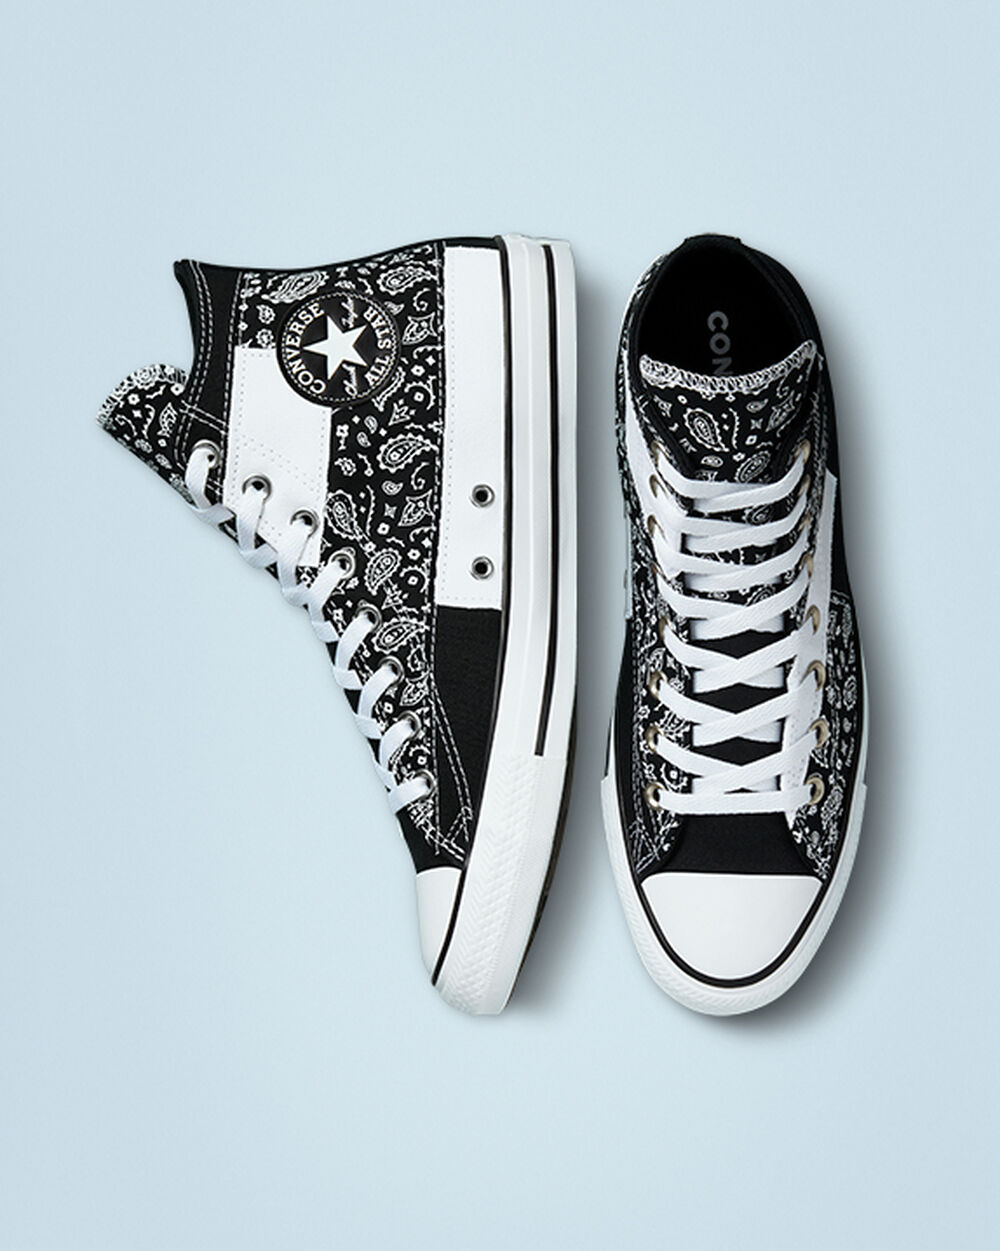 Tenis Converse Chuck Taylor All Star Mujer Negros Blancos Negros | Mexico-871646